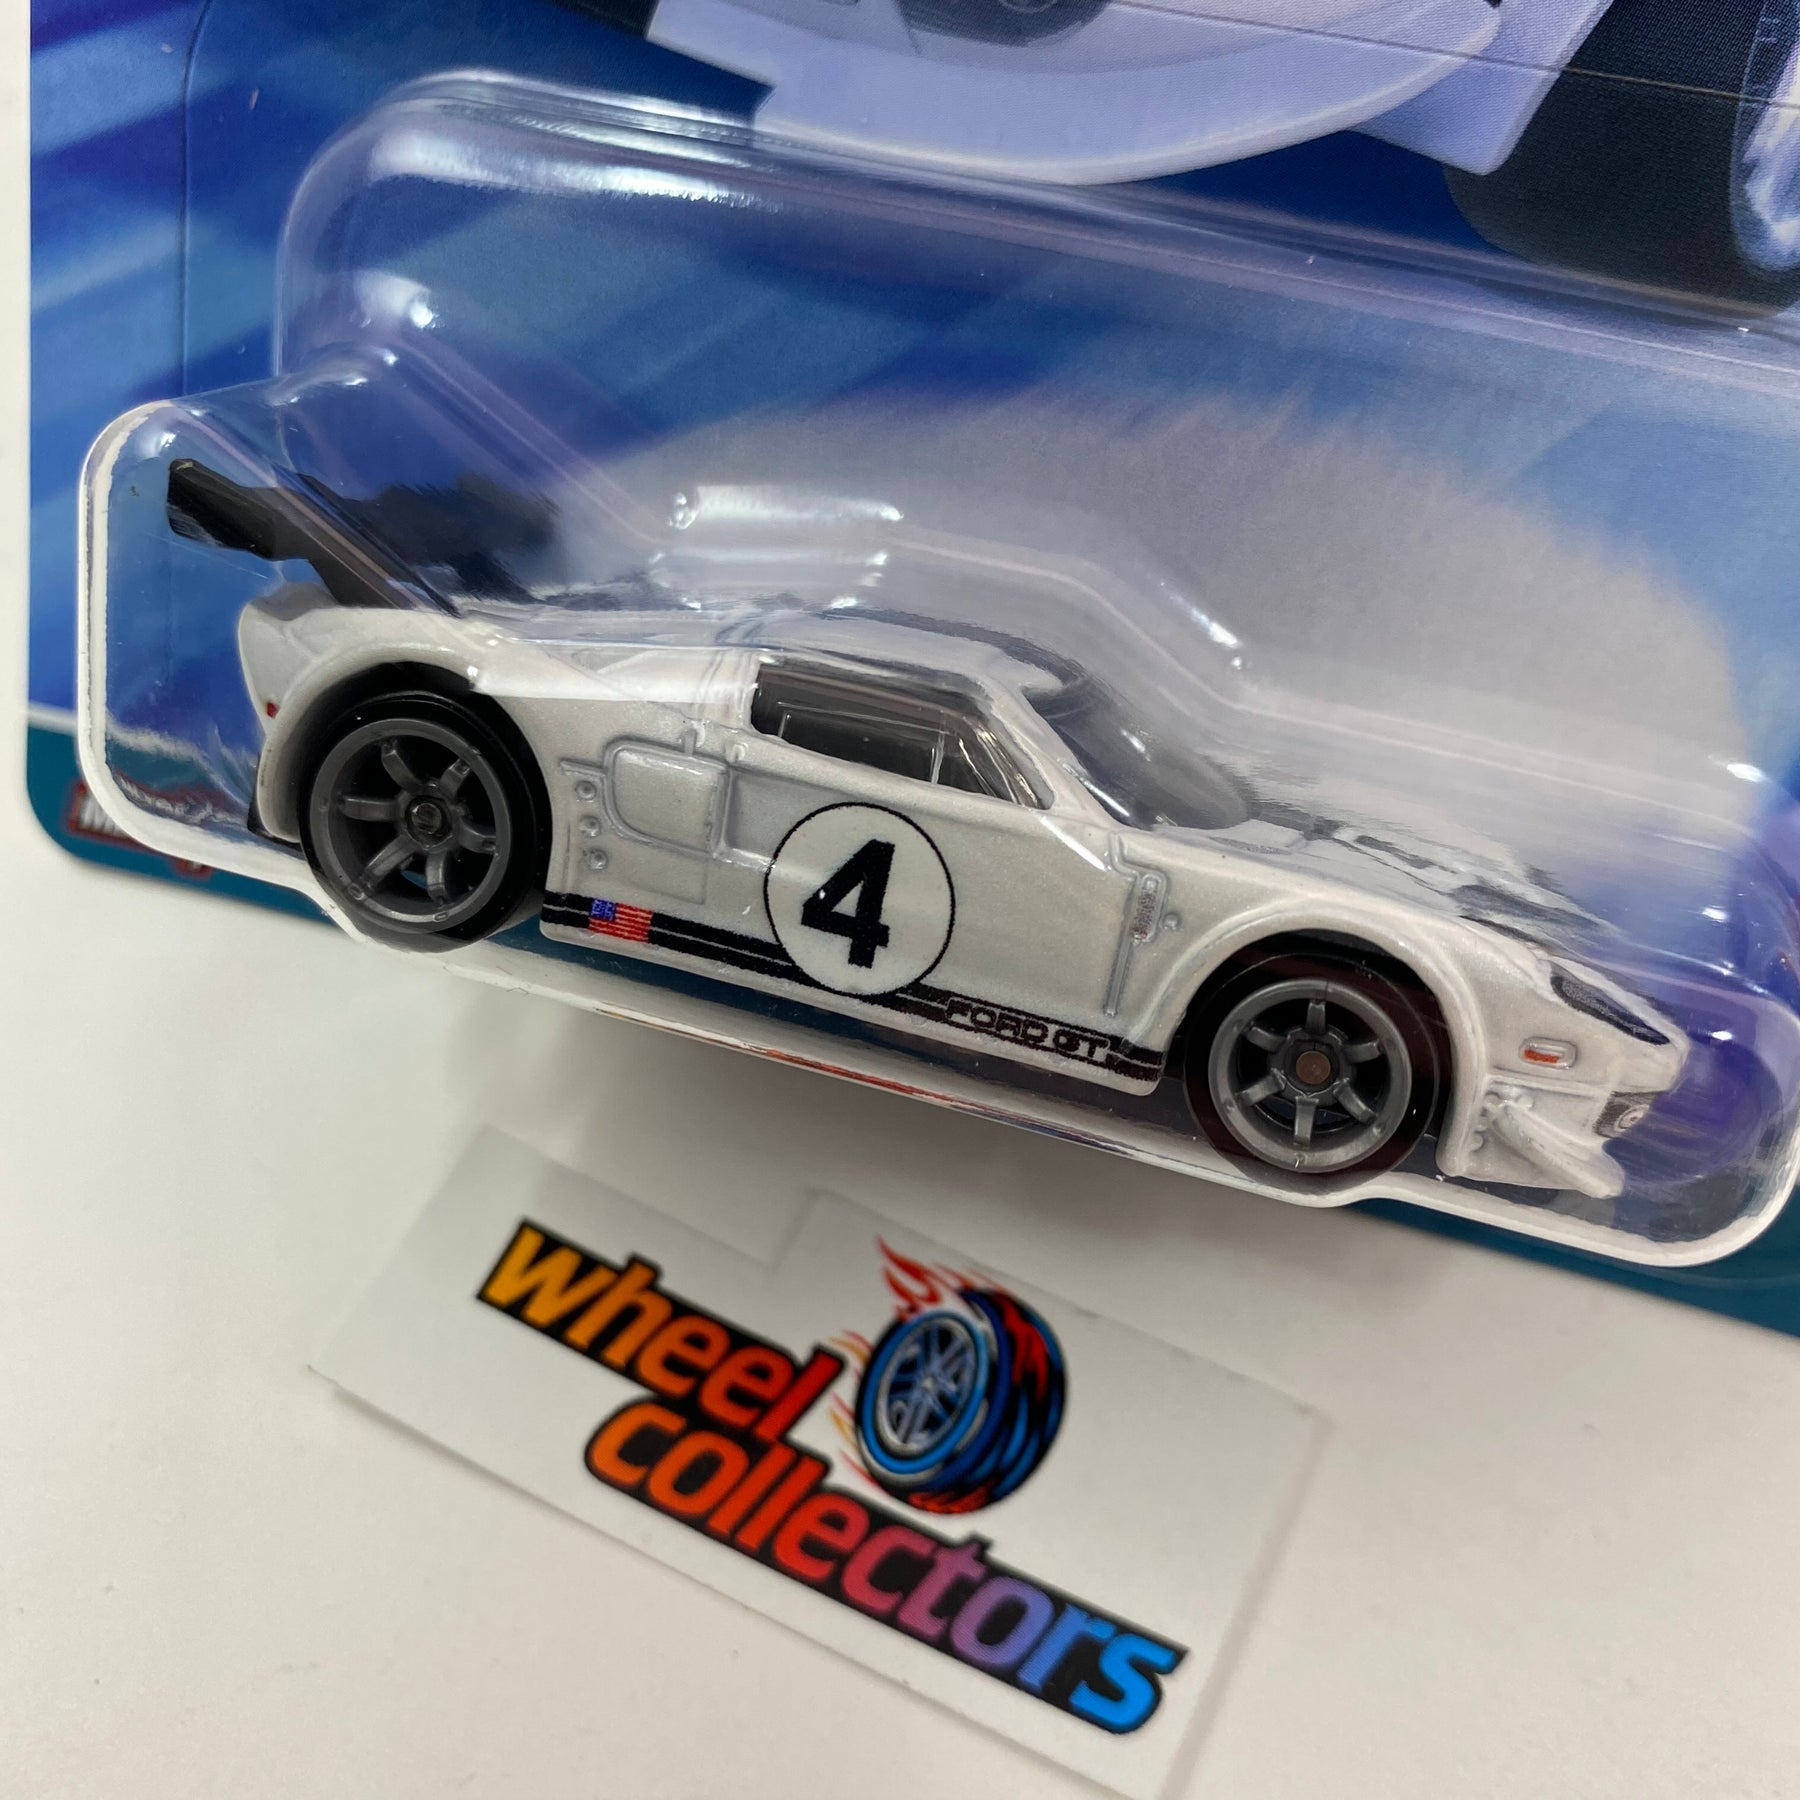 Hot Wheels Car Culture Speed Machine - Ford GT (Toy) - HobbySearch Toy Store